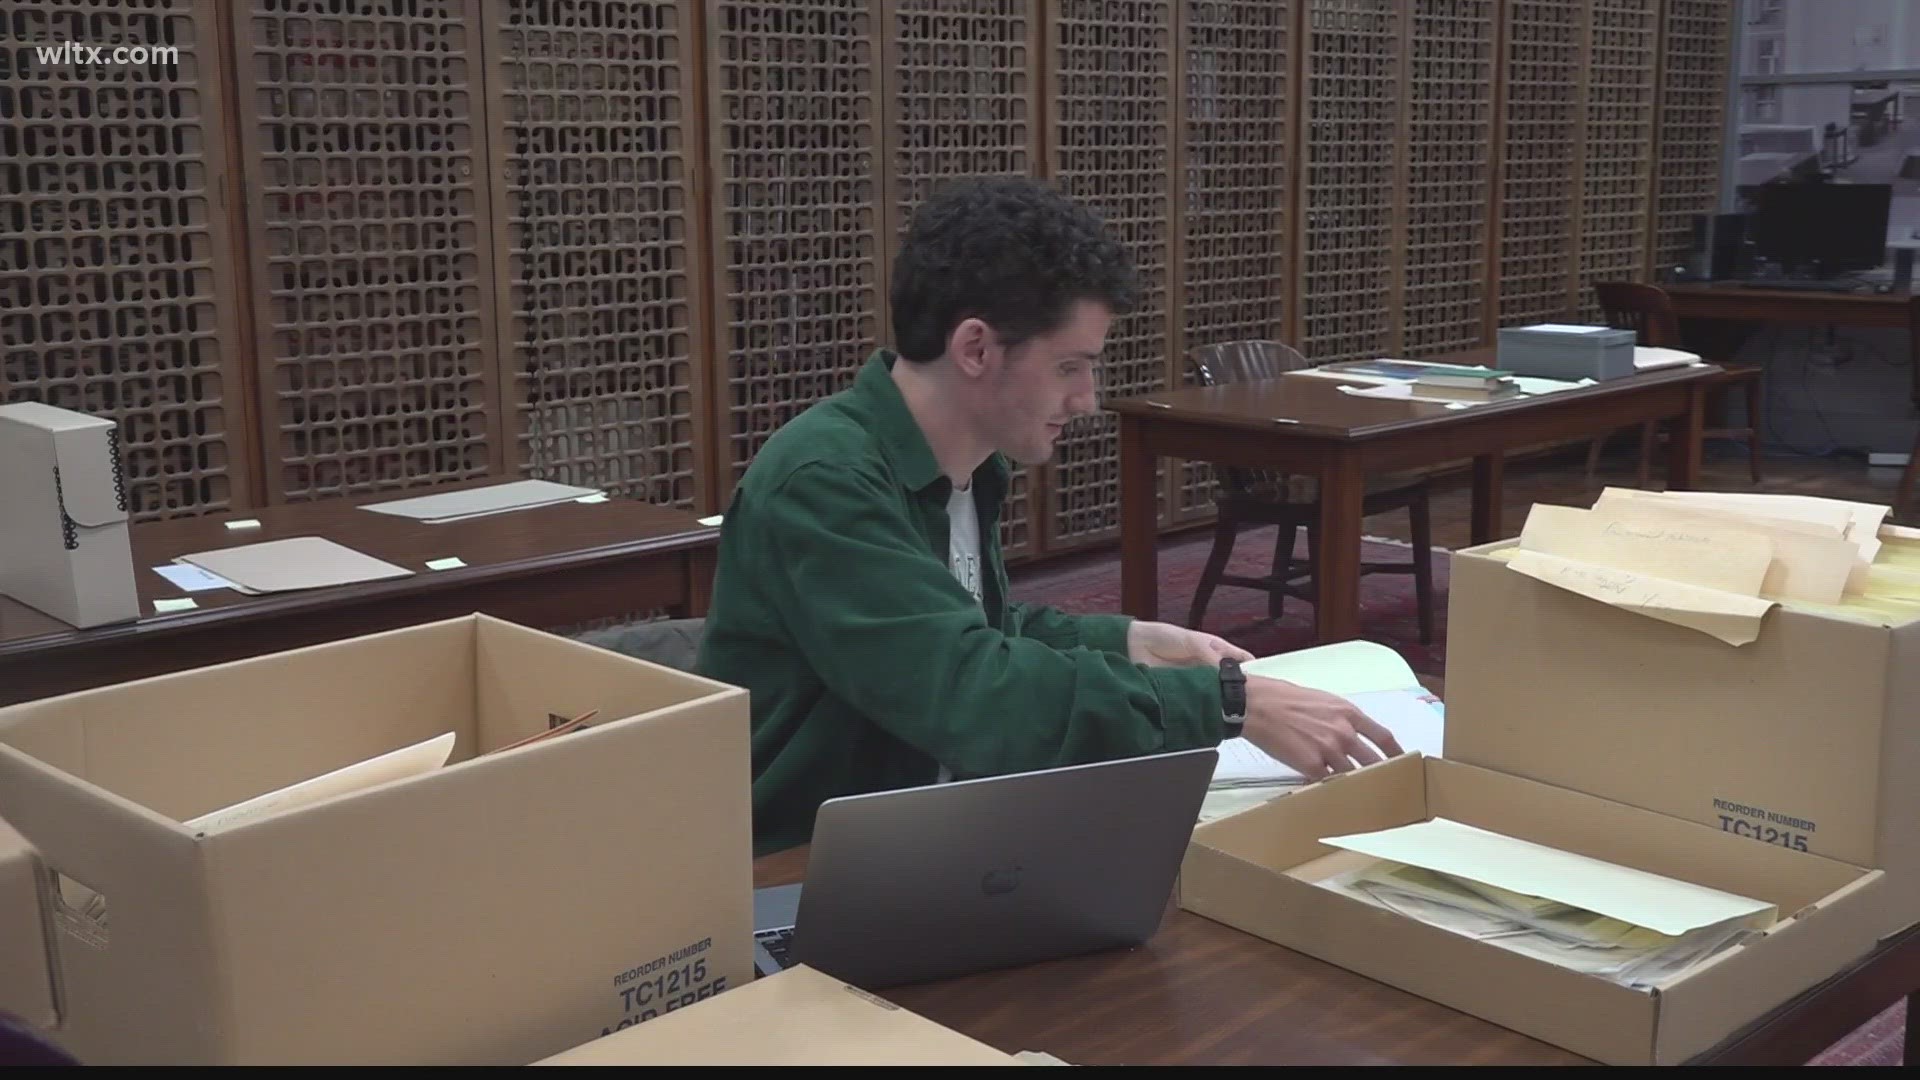 USC student researching a former furniture company, the Williams Furniture company.